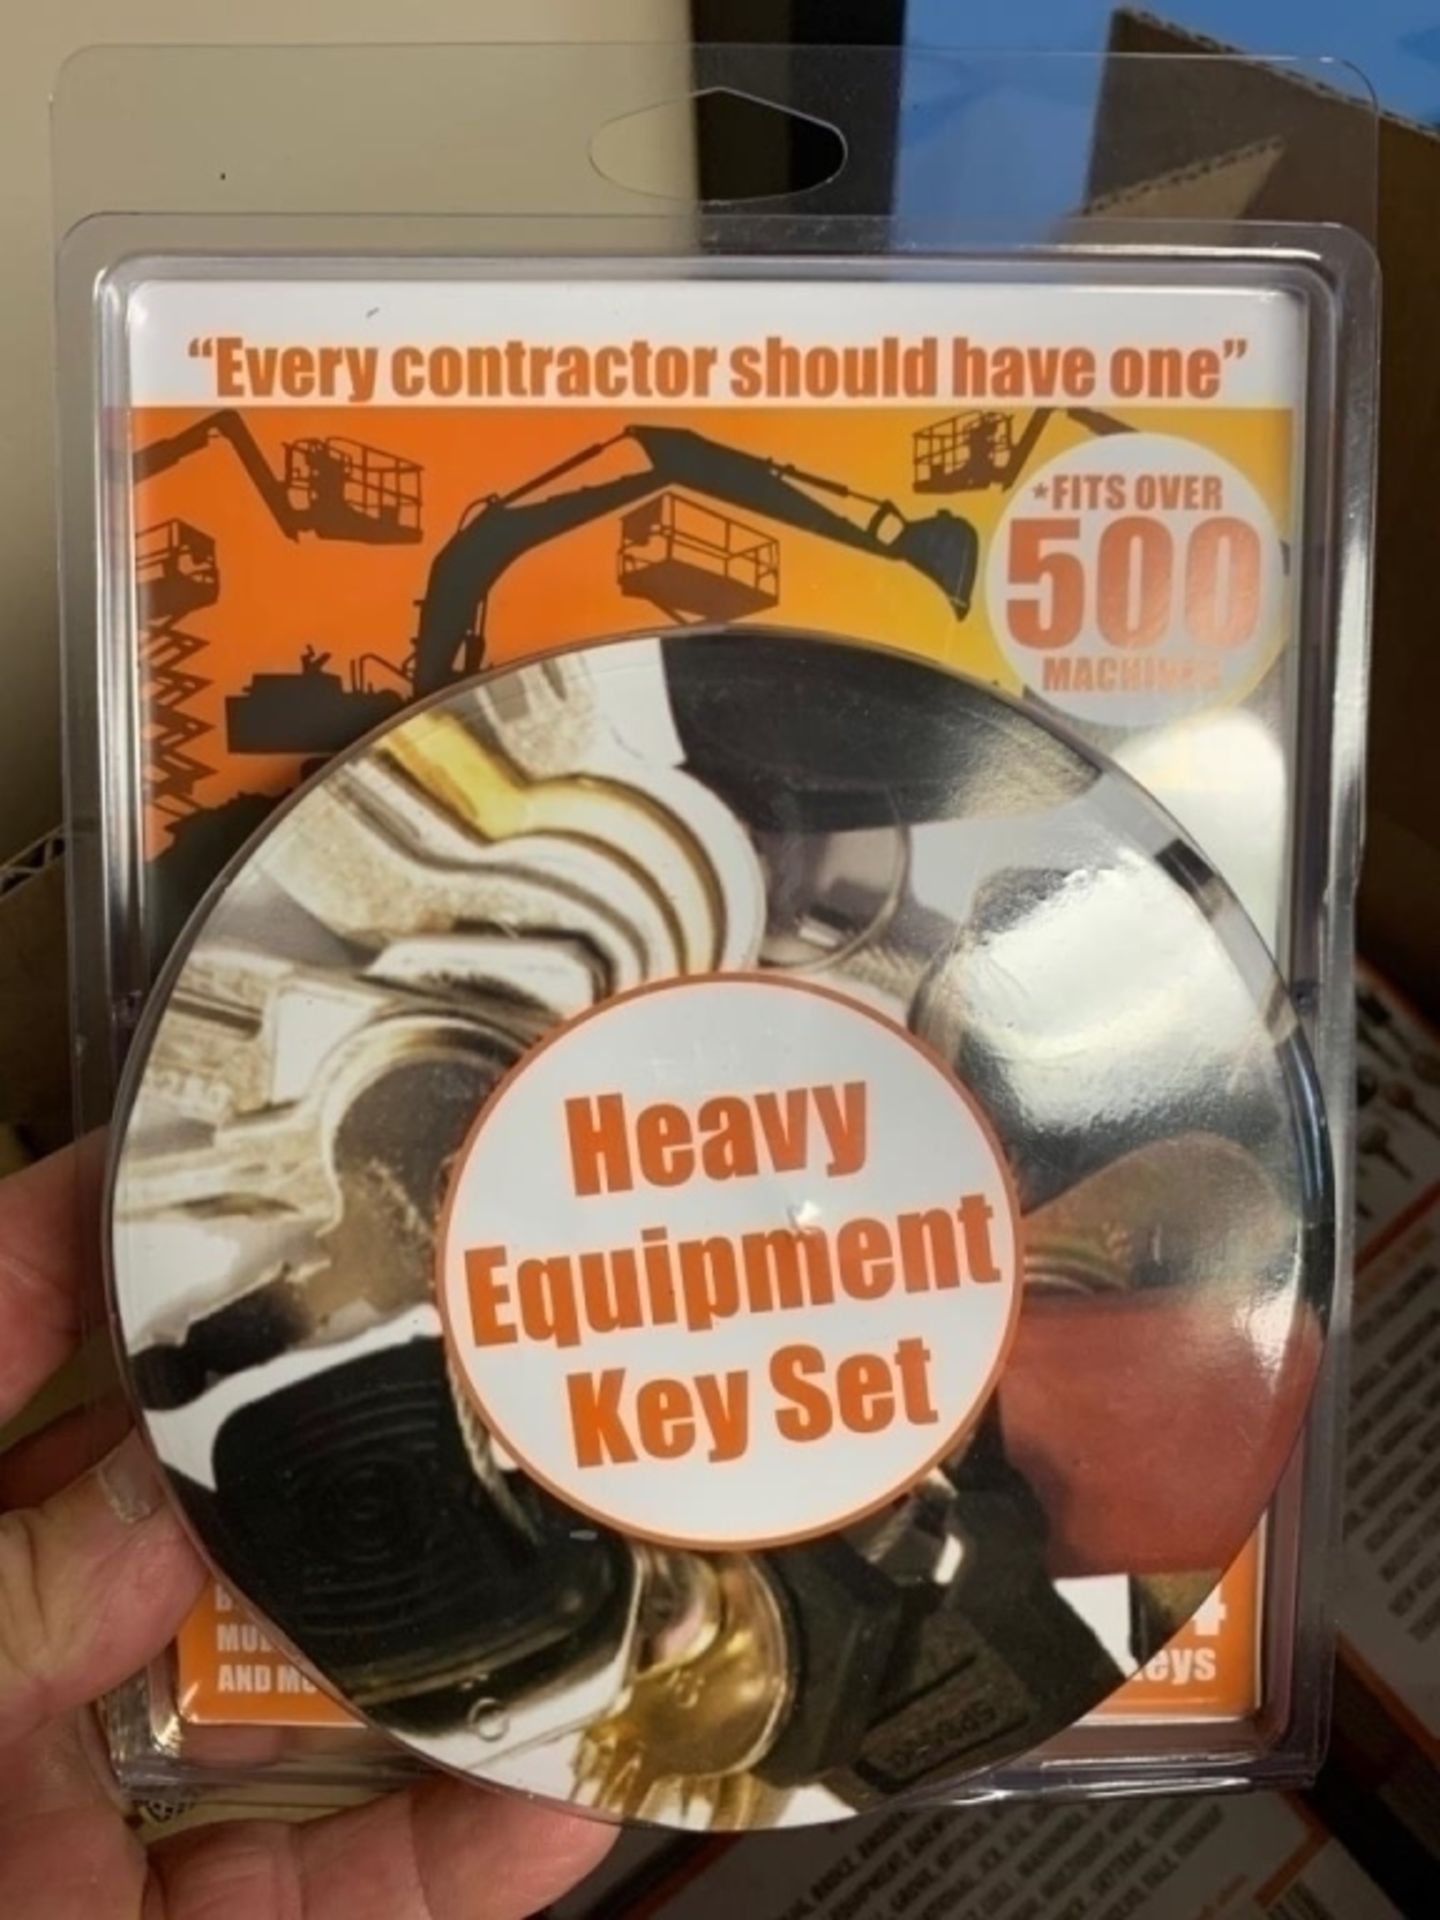 New Unused Heavy Equipment 24-Key Set, Fits Over 500 Different Machines - Image 3 of 6